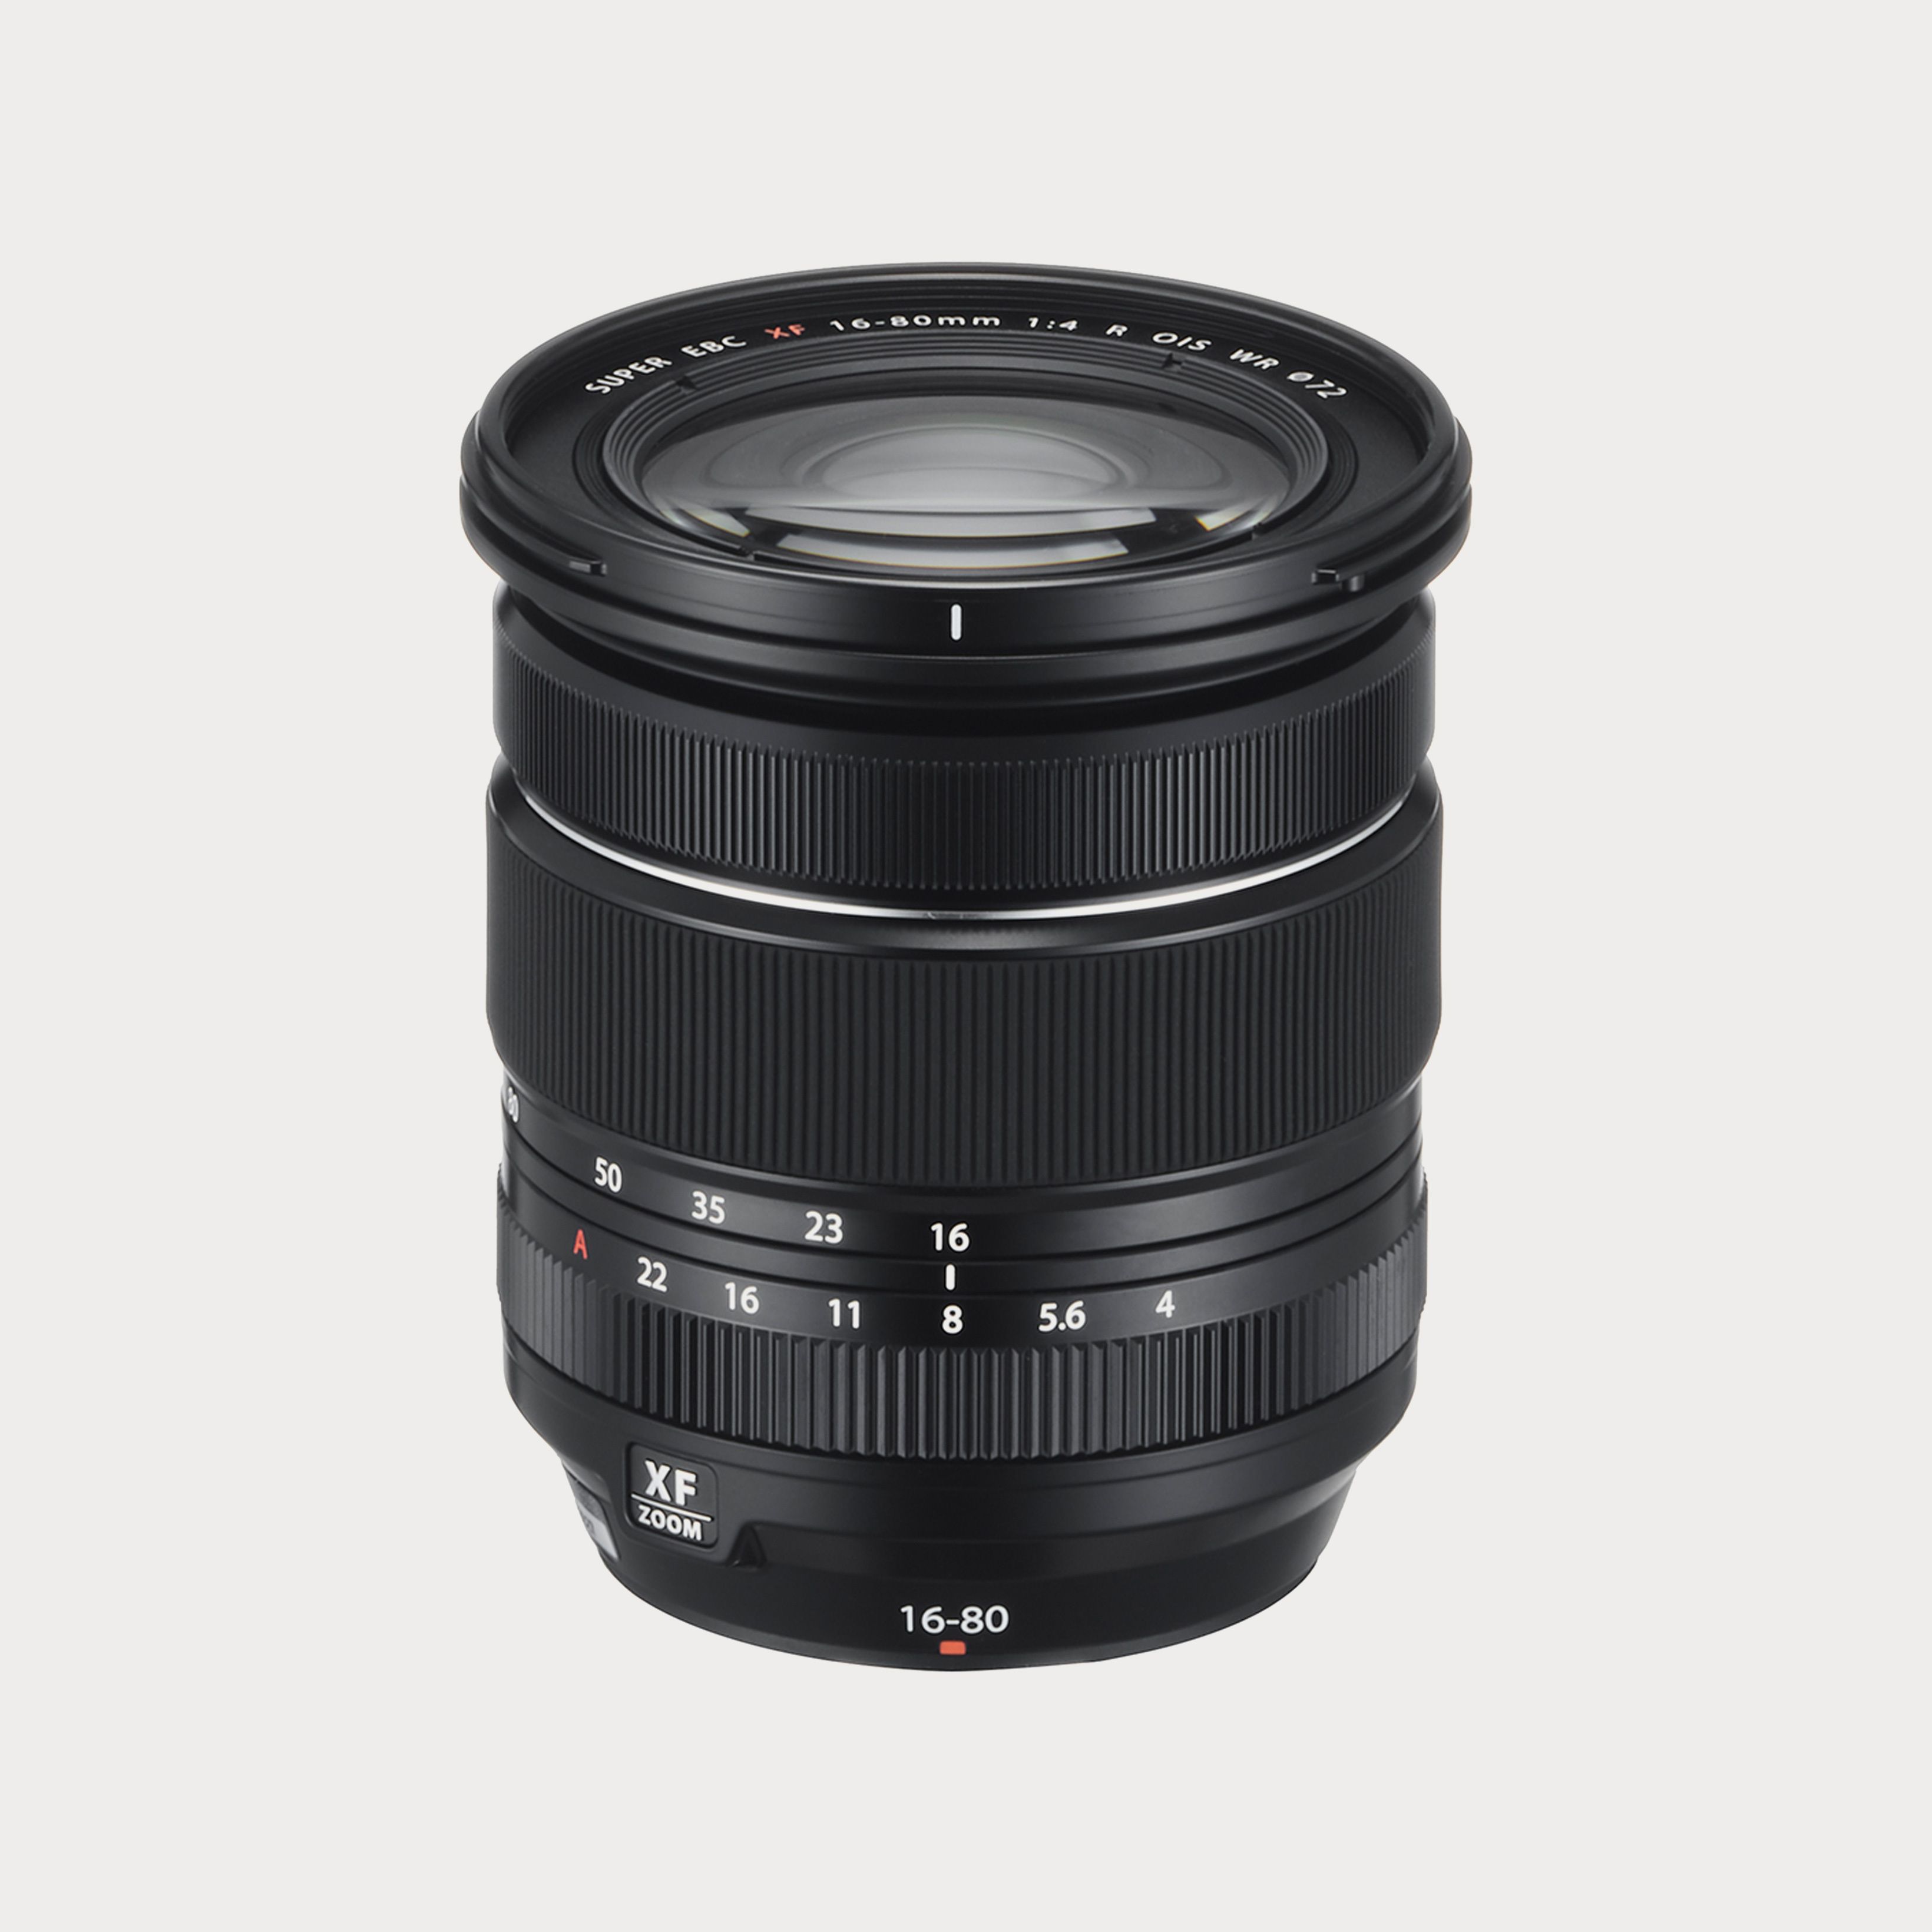 XF 16-55mm F2.8 R LM WR Lens - Lens Only